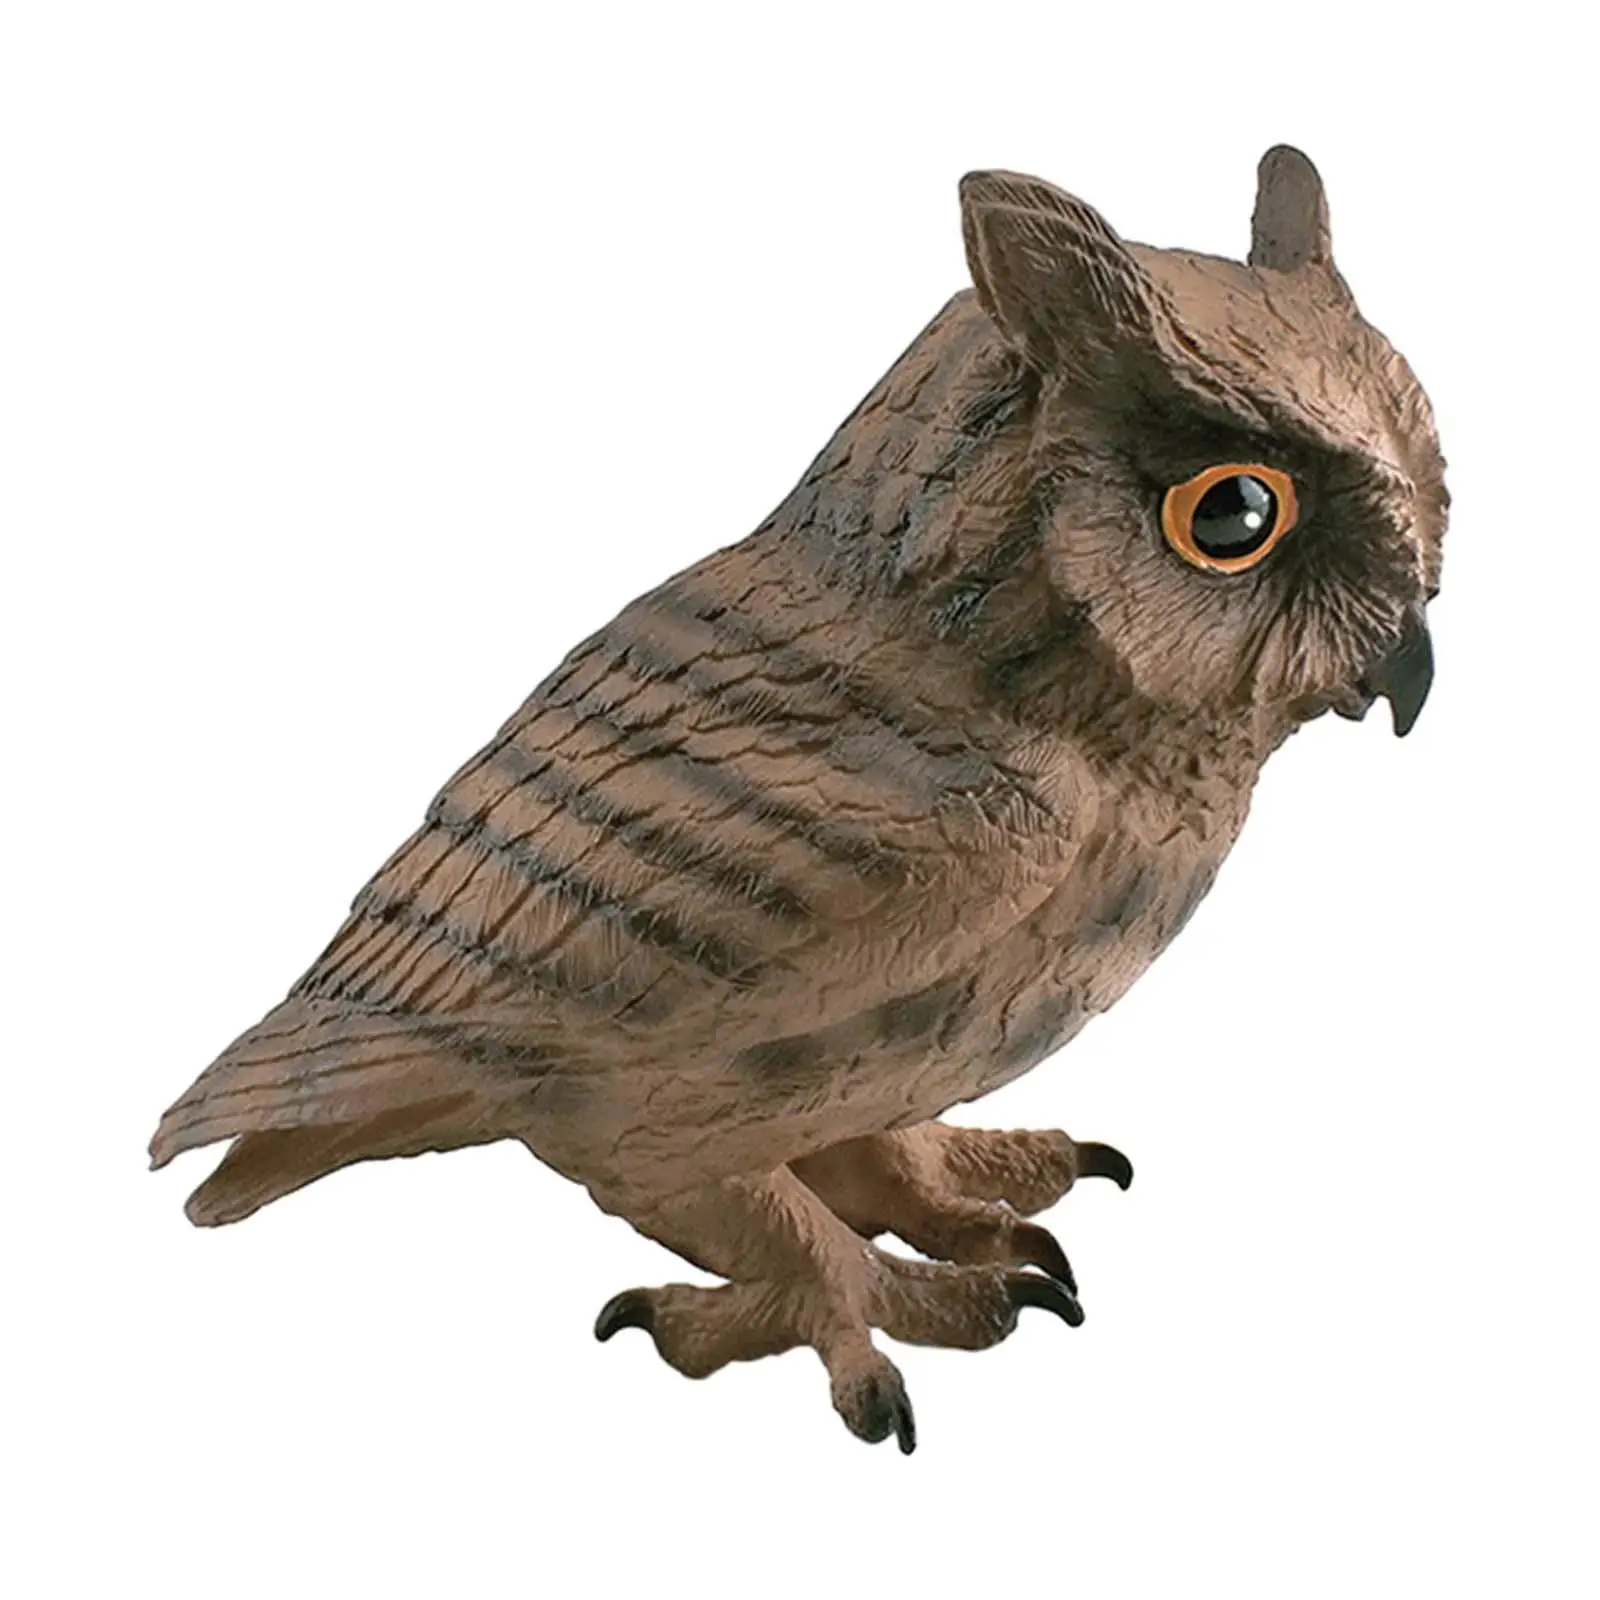 Realistic Owl Sculpture Educational Toys Owl Statue Sculptures for Decor Birthday Gift Ornaments Educational Garden Yard Decors